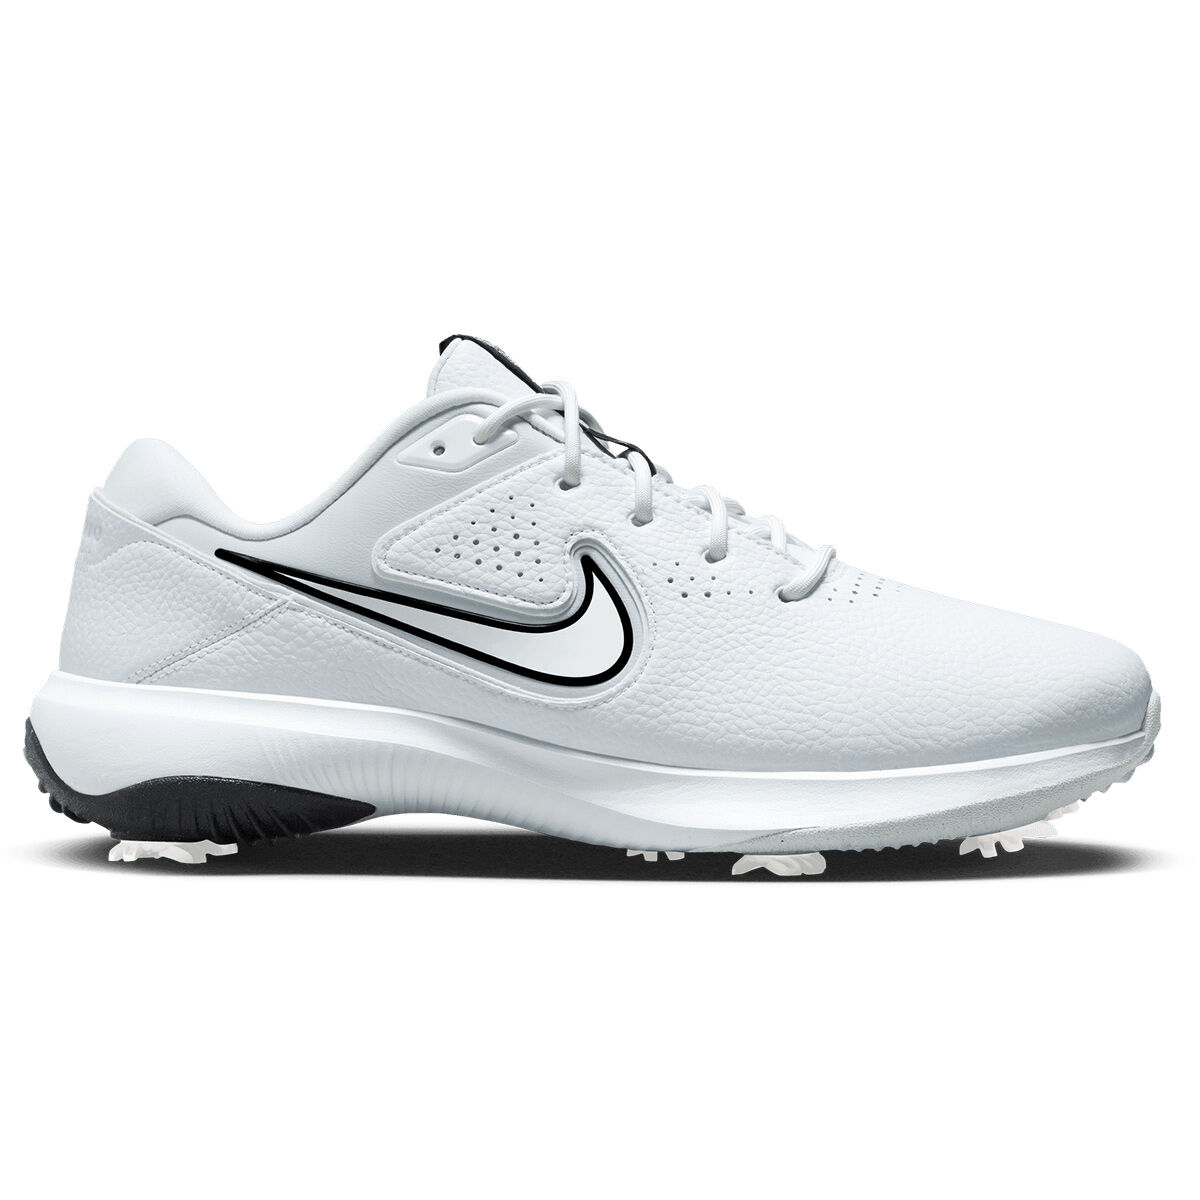 Nike Men’s Victory Pro 3 Waterproof Spiked Golf Shoes, Mens, White/black/pure platinum, 8 | American Golf